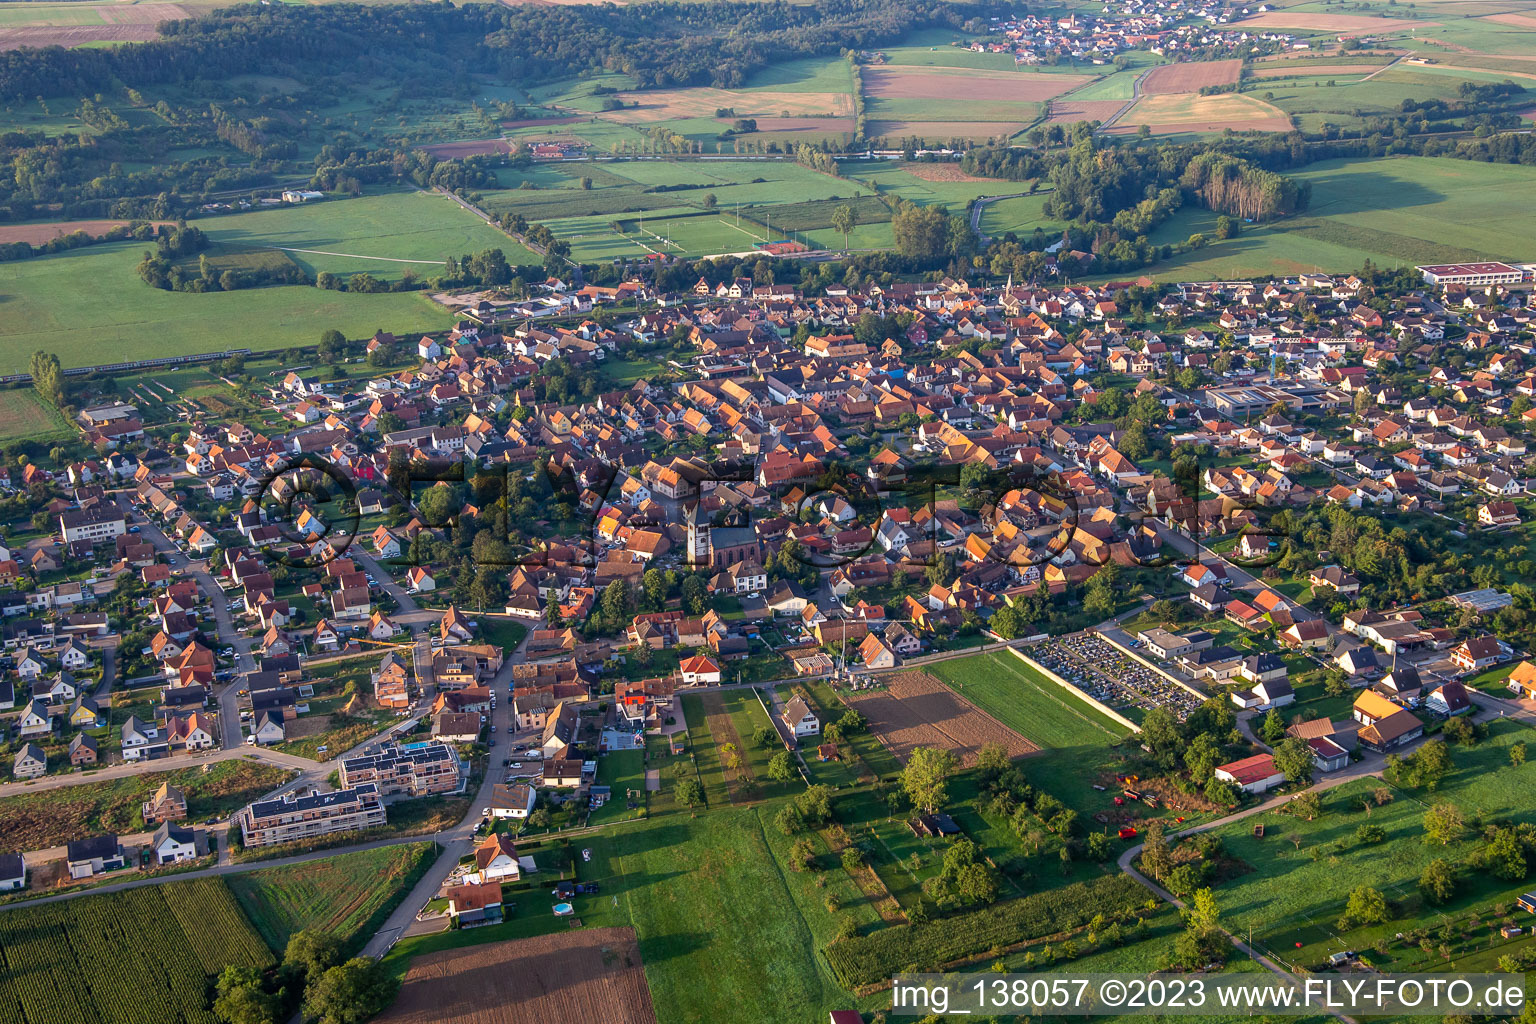 Schwindratzheim in the state Bas-Rhin, France from the drone perspective